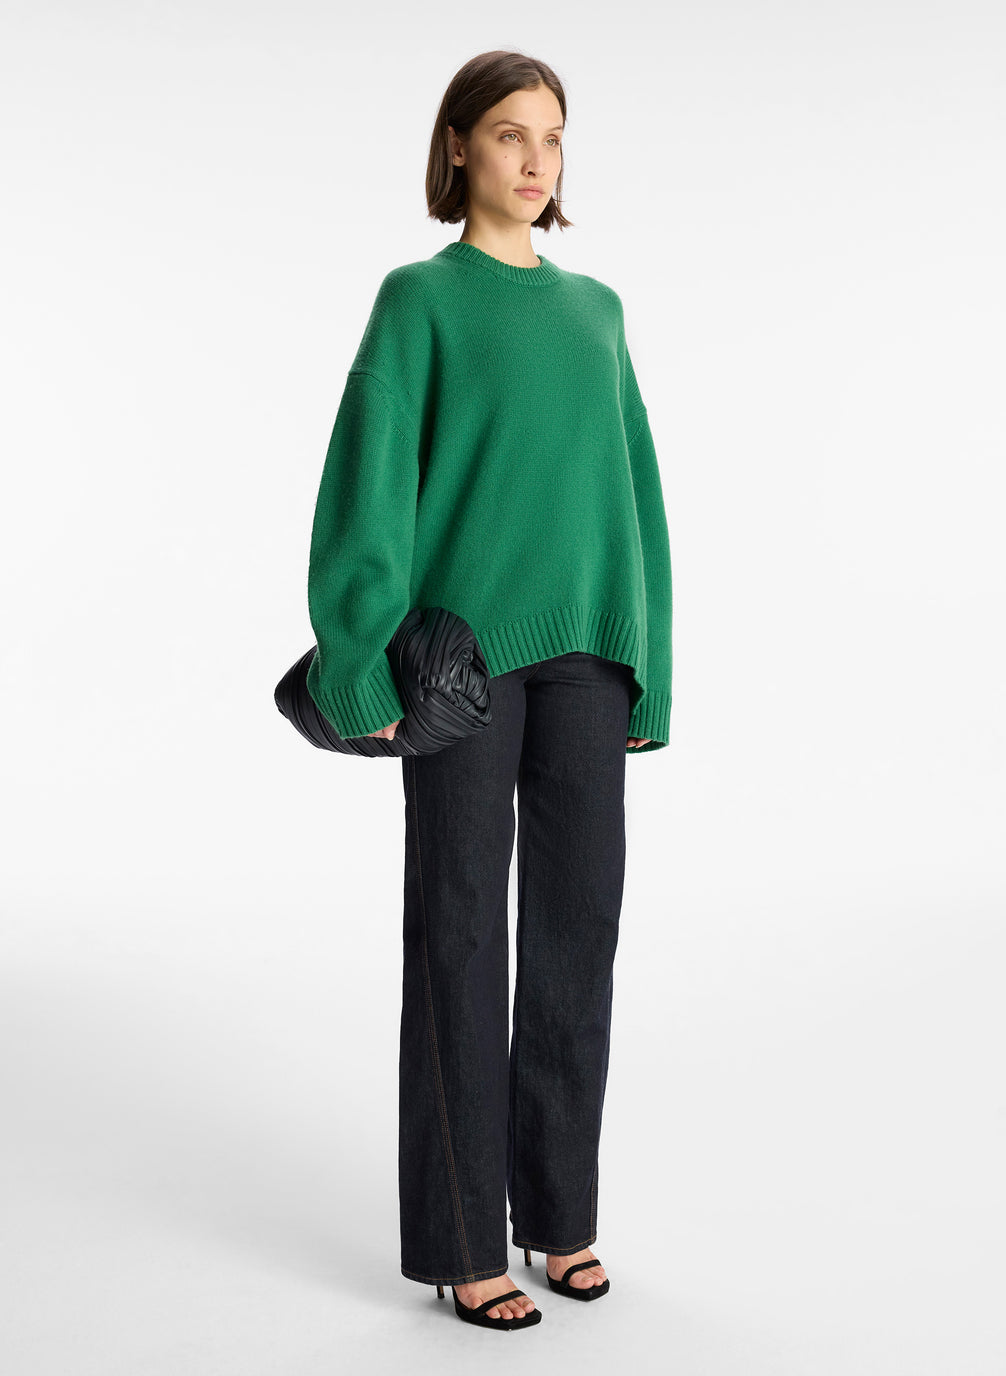 side view of woman wearing green cashmere long sleeve sweater